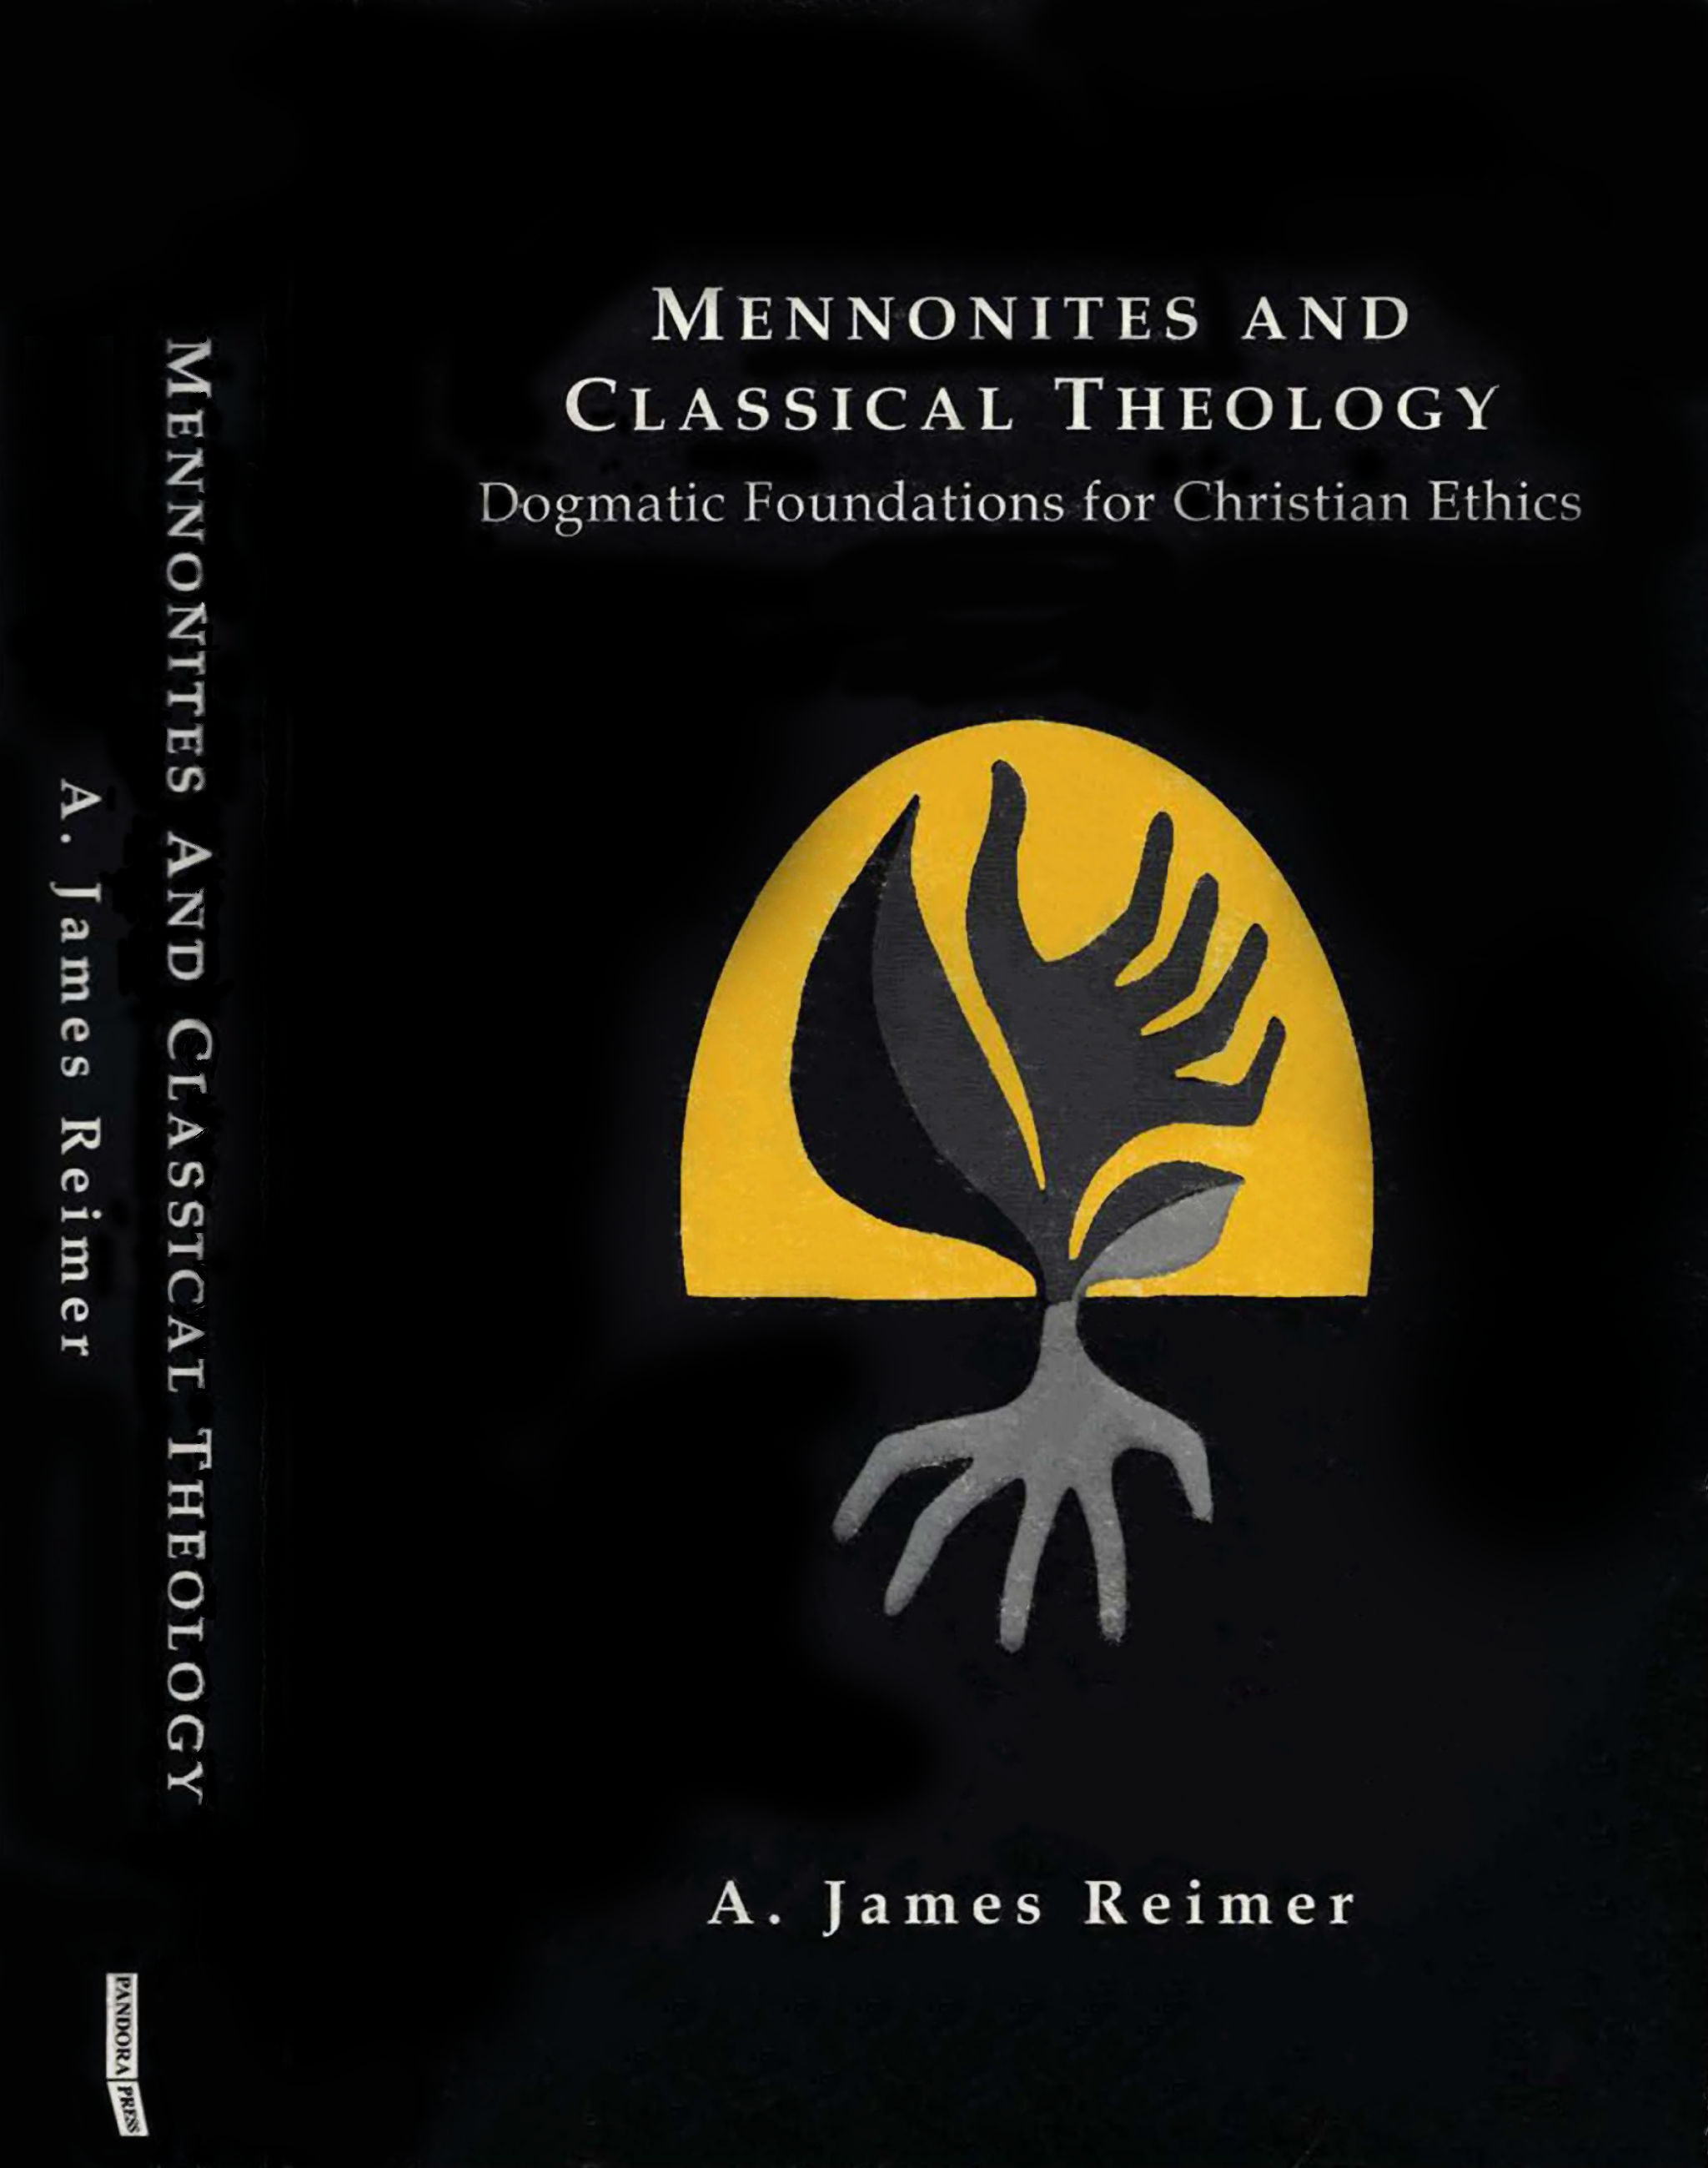 Bule Martyr Silicon Mennonites and Classical Theology: Dogmatic Foundations for Christian Ethics,  by A. James Reimer